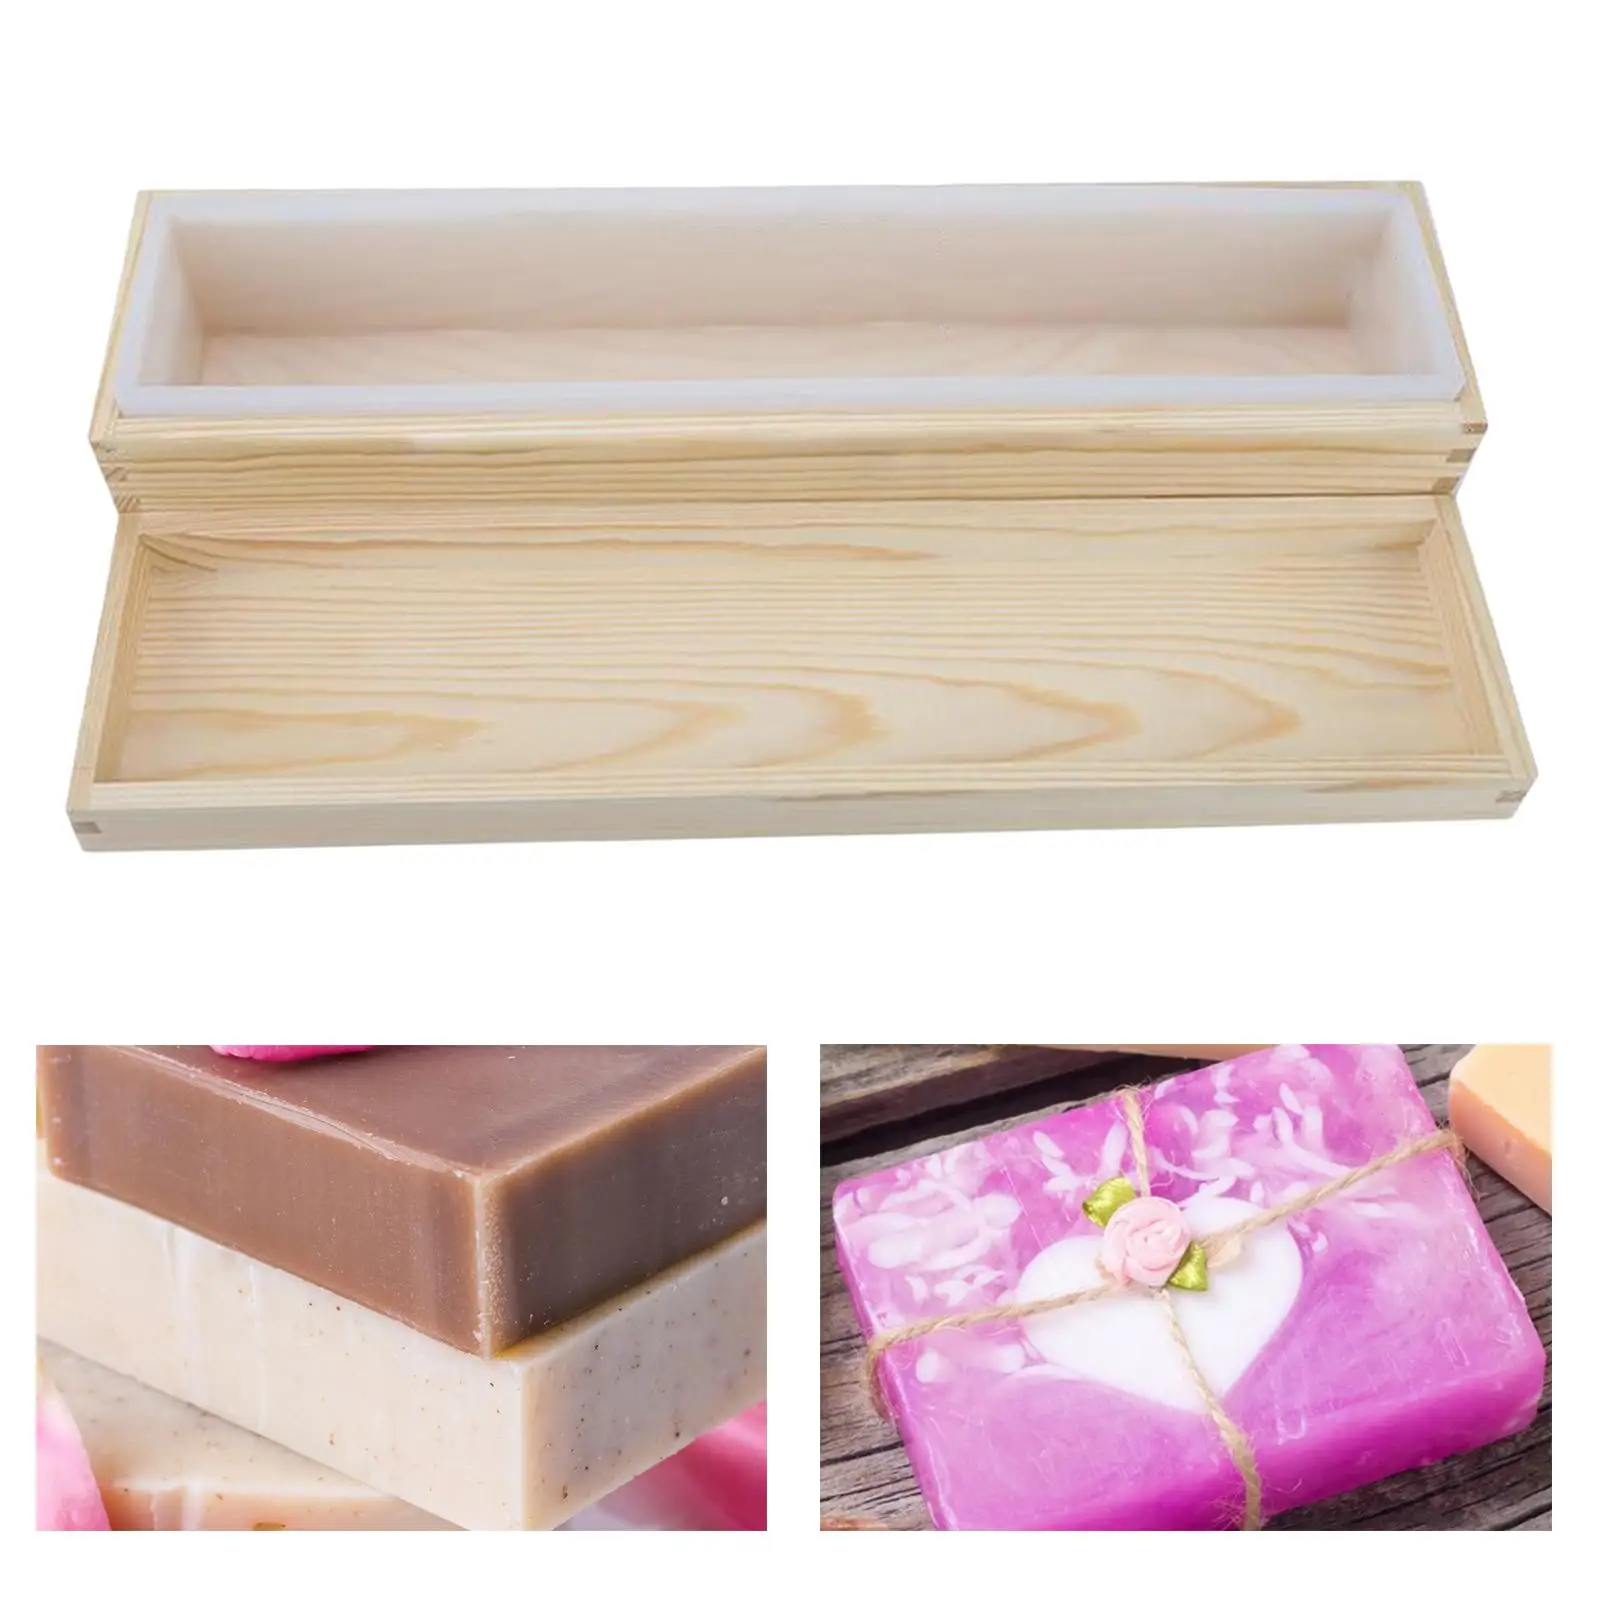 Soap Making Mould Silicone Resin Crafts Chocolate Loaf Mold DIY Homemade Soap Supplies Baking Pan Molds w/ Lid